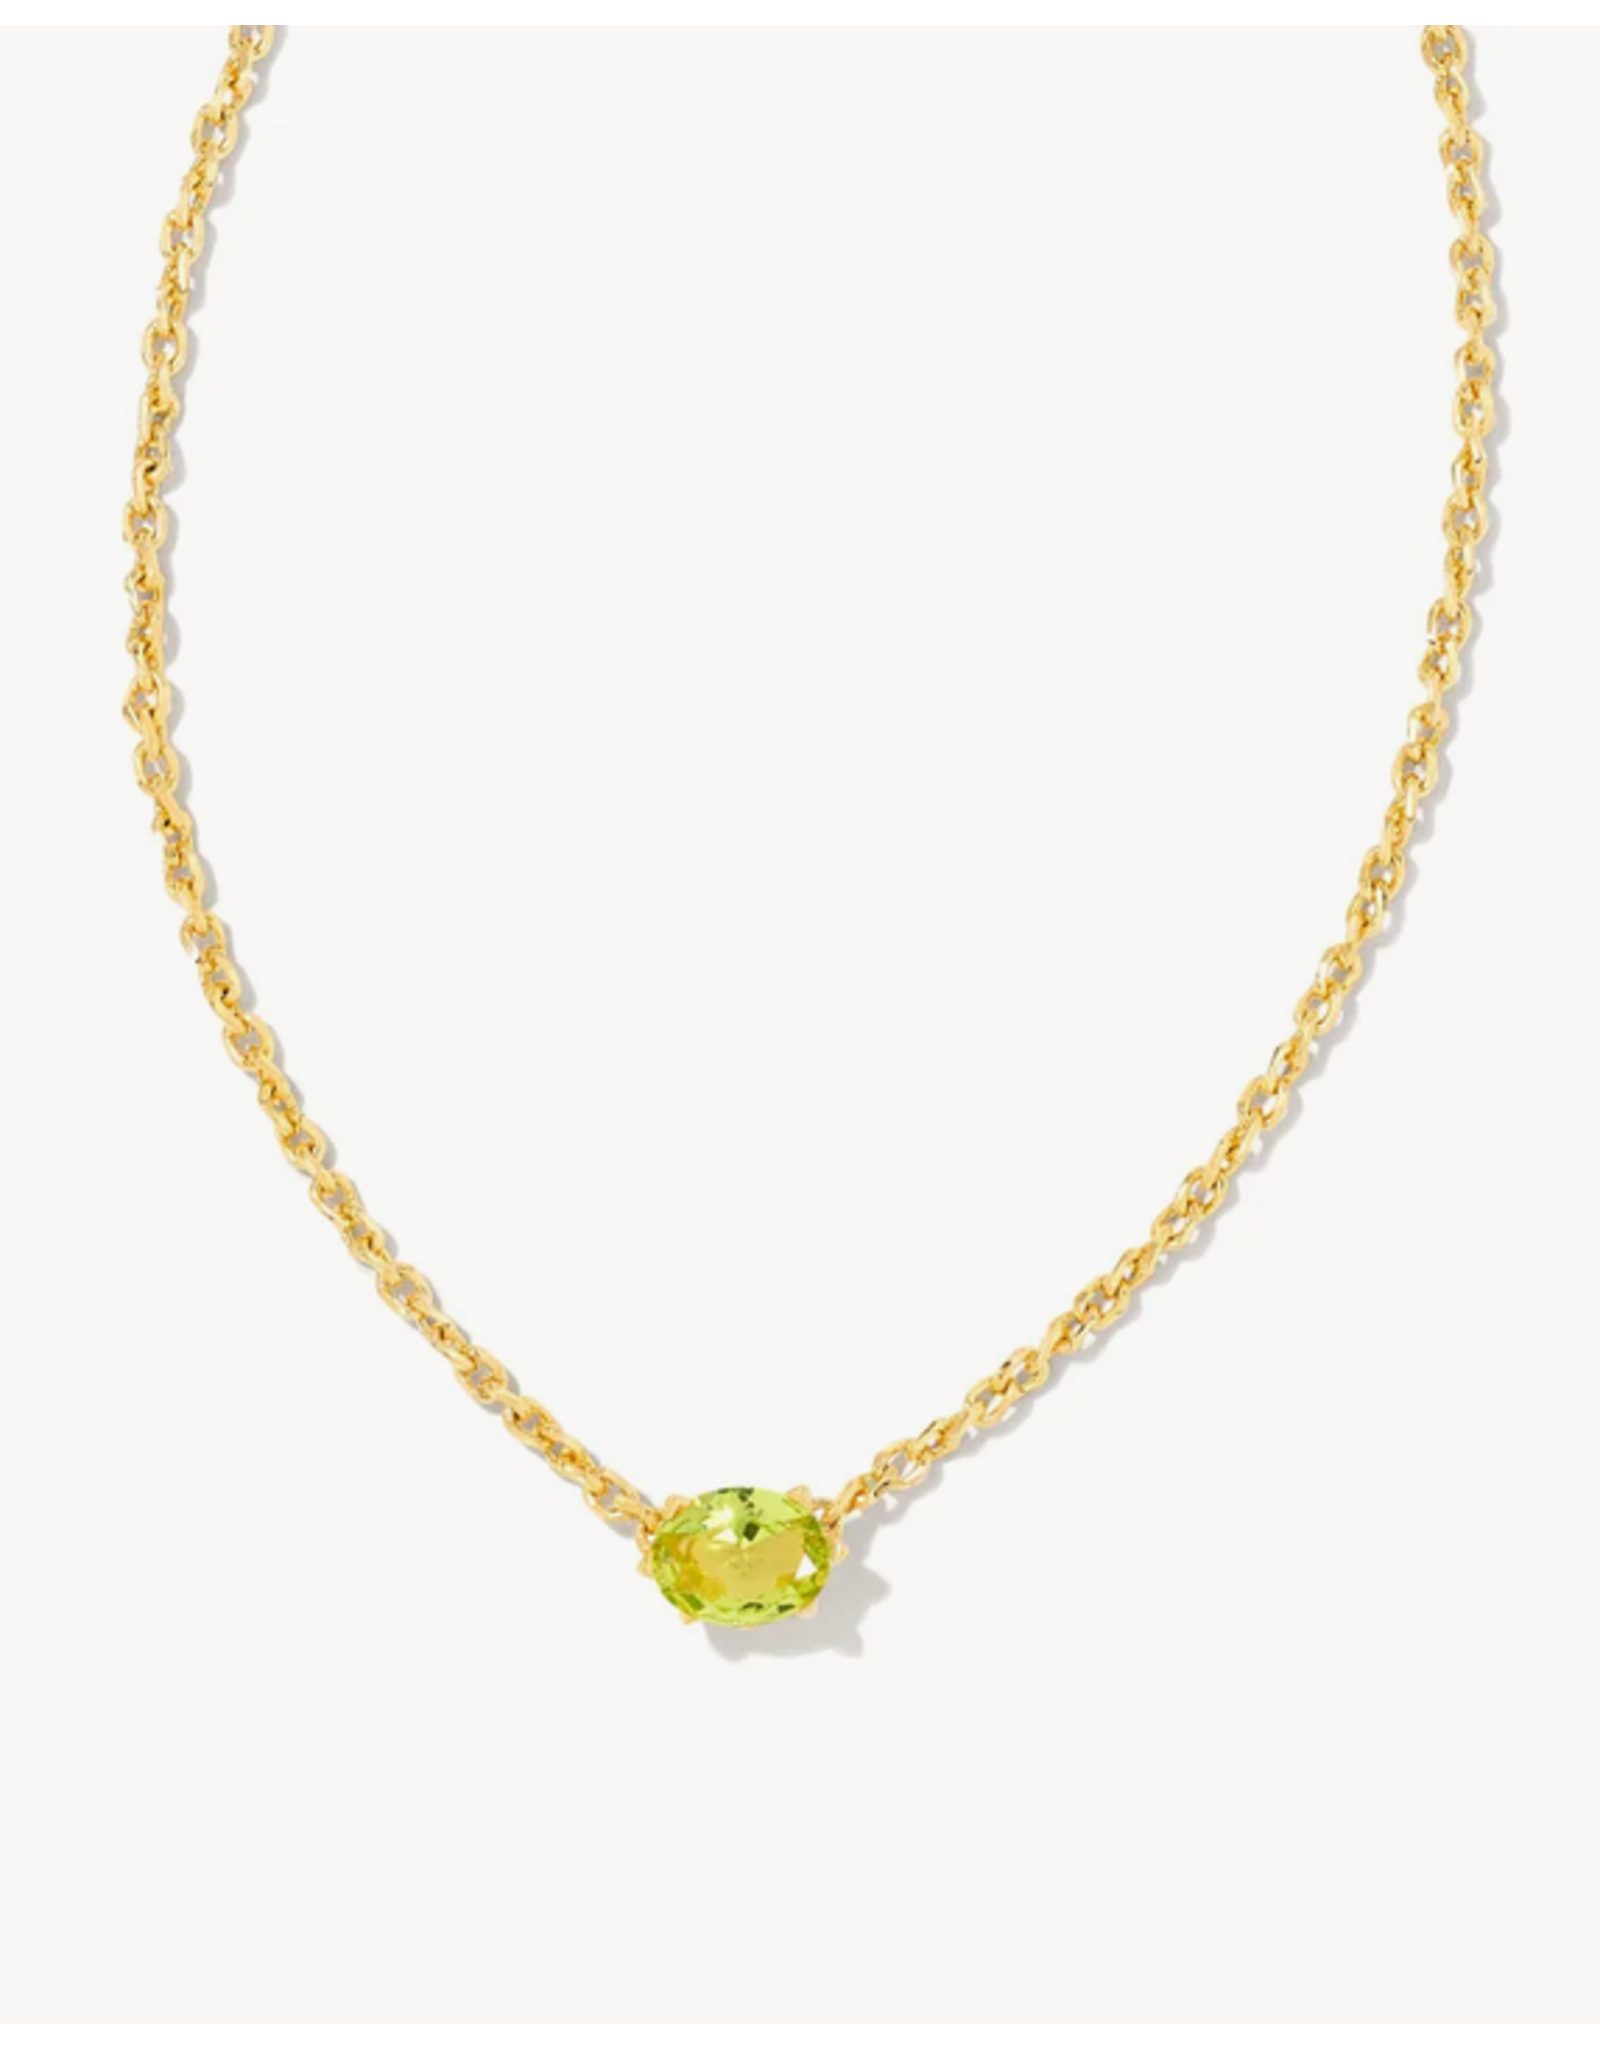 Kendra Scott Cailin Necklace Peridot Crystal on Gold (AUG.)